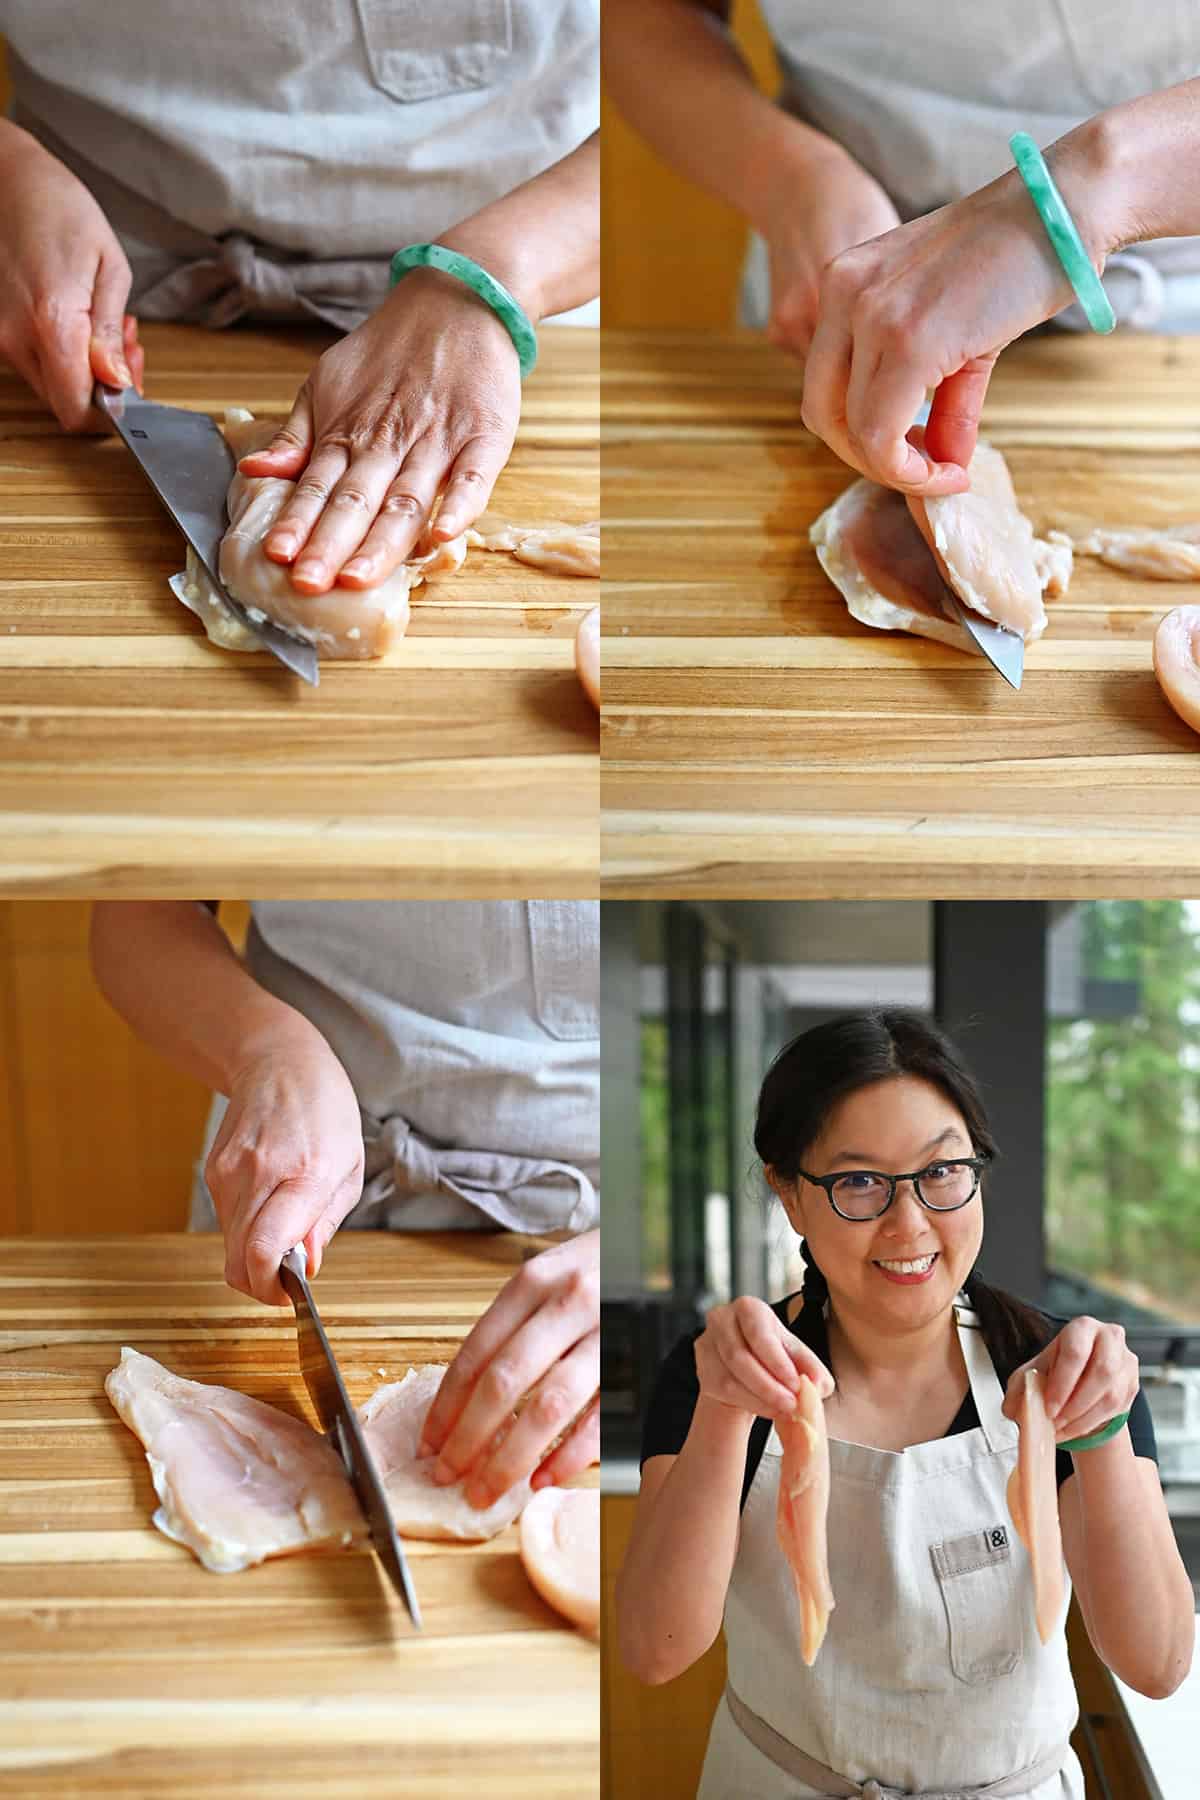 Four step-by-step shots that show someone cutting a boneless skinless chicken breast in half lengthwise to make to thin cutlets.